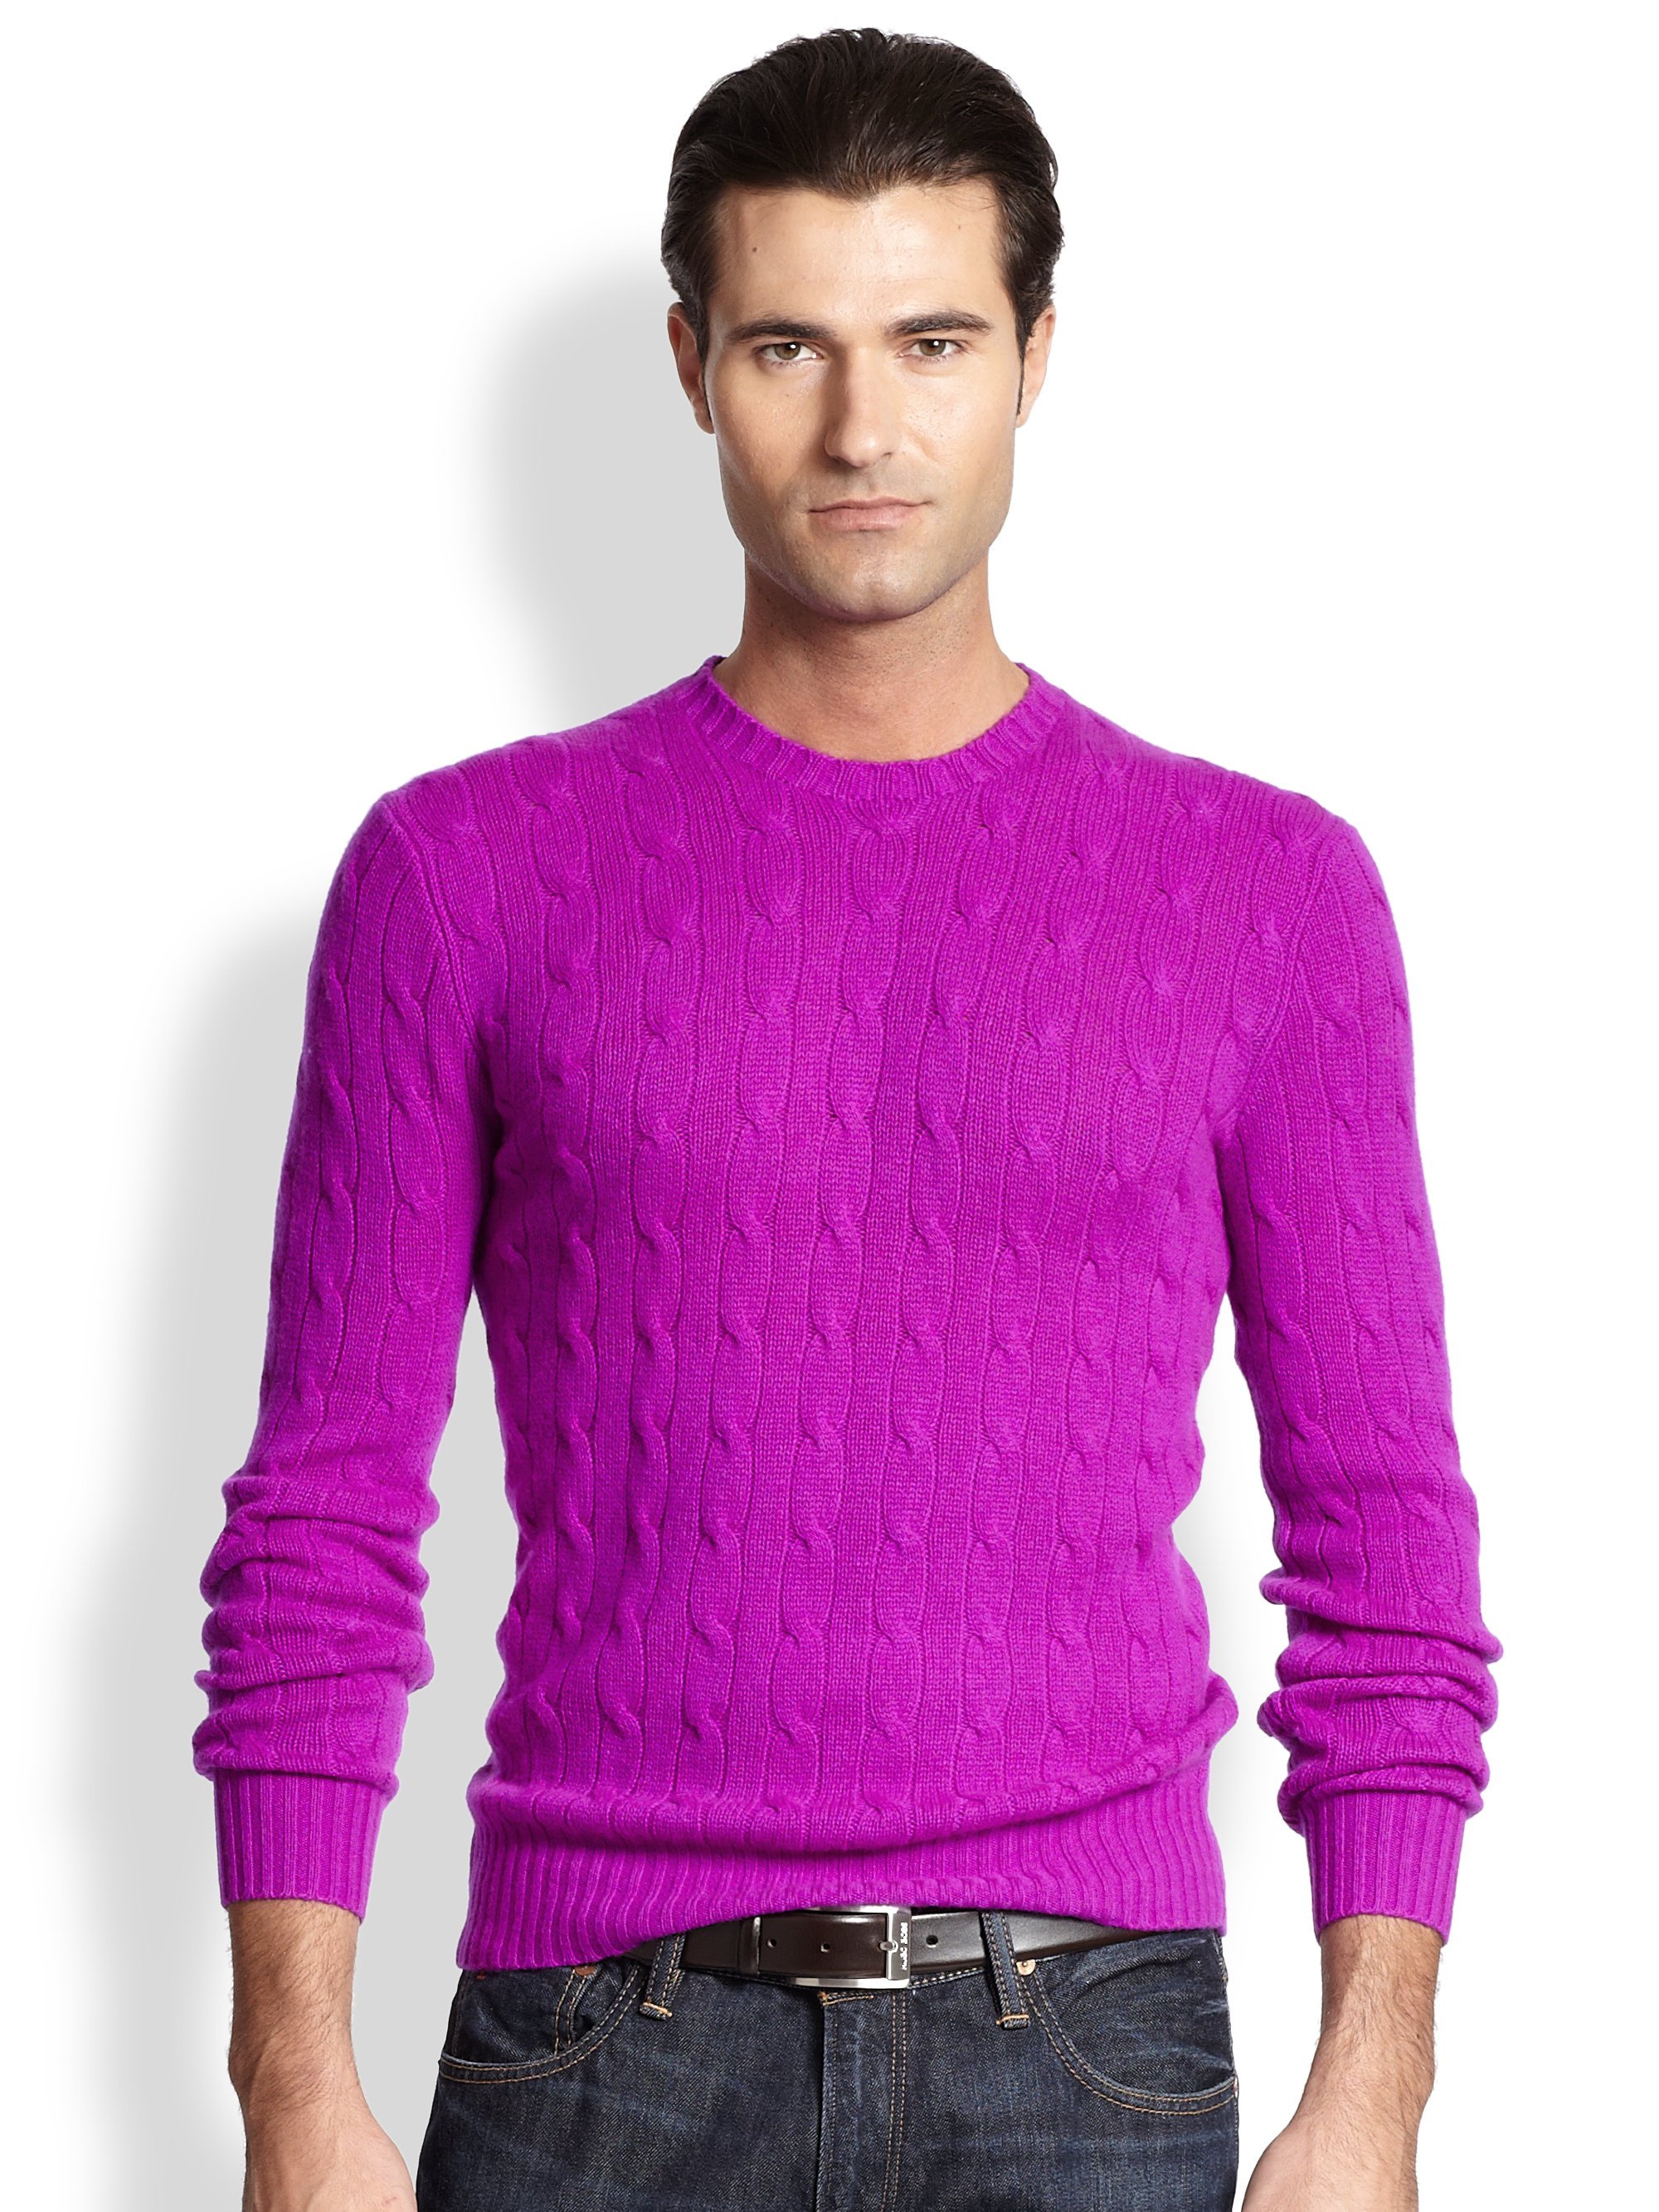 Lyst - Polo Ralph Lauren Cable-knit Cashmere Sweater in Purple for Men